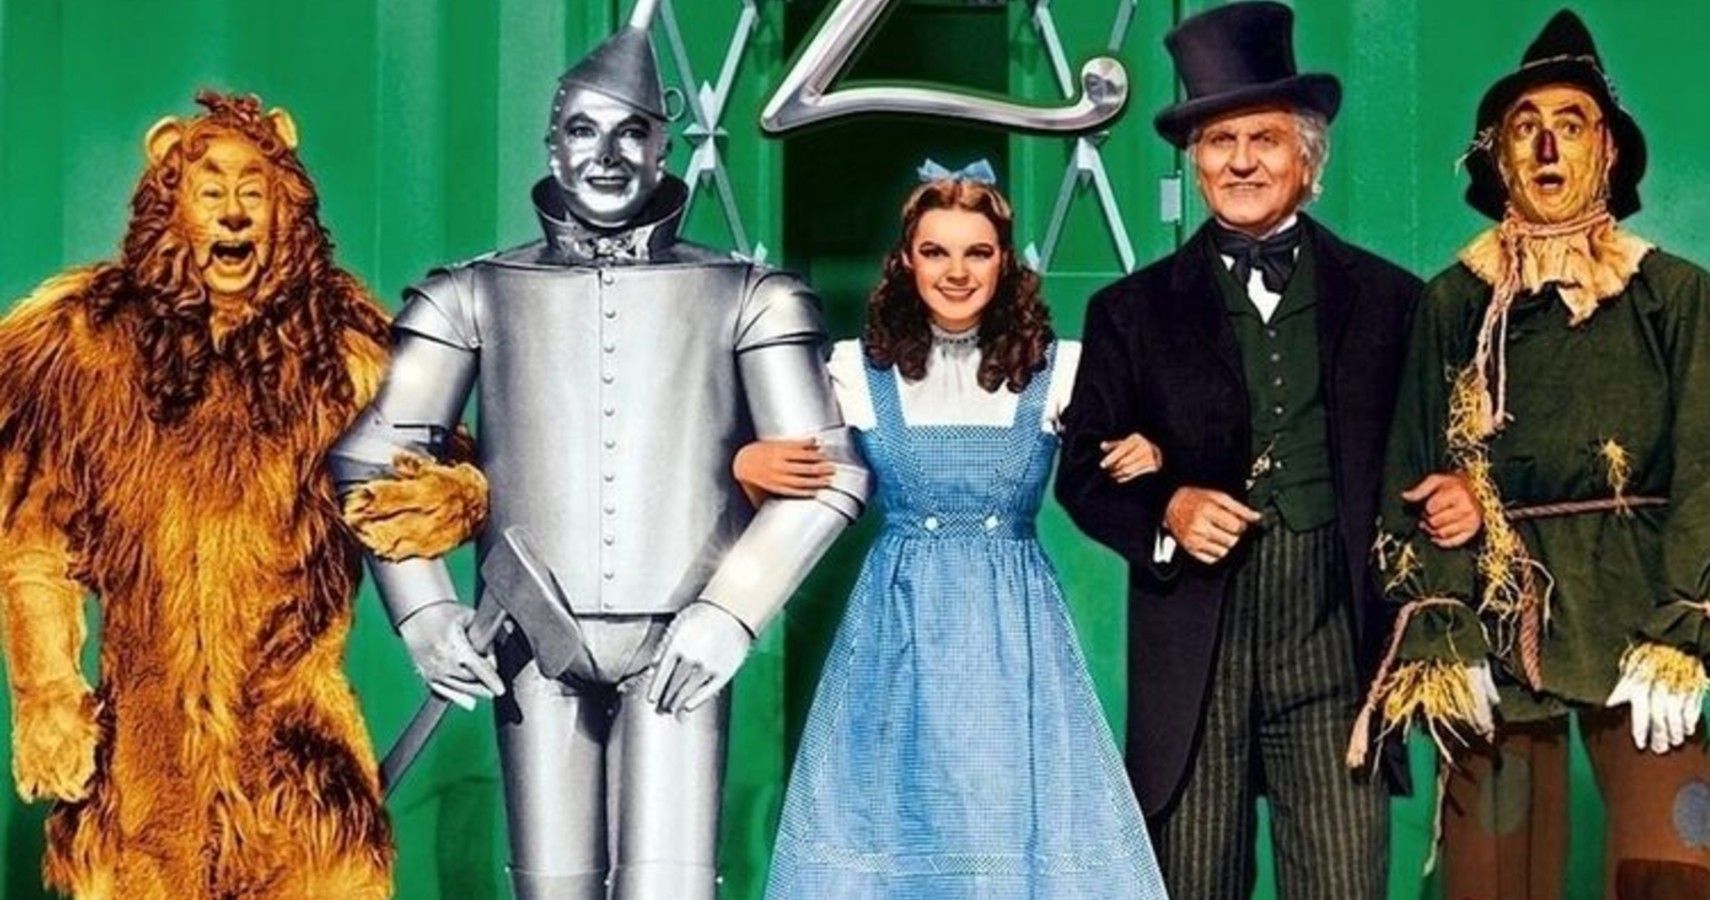 The Wizard Of Oz 10 Things Fans Didn't Know About The Movie